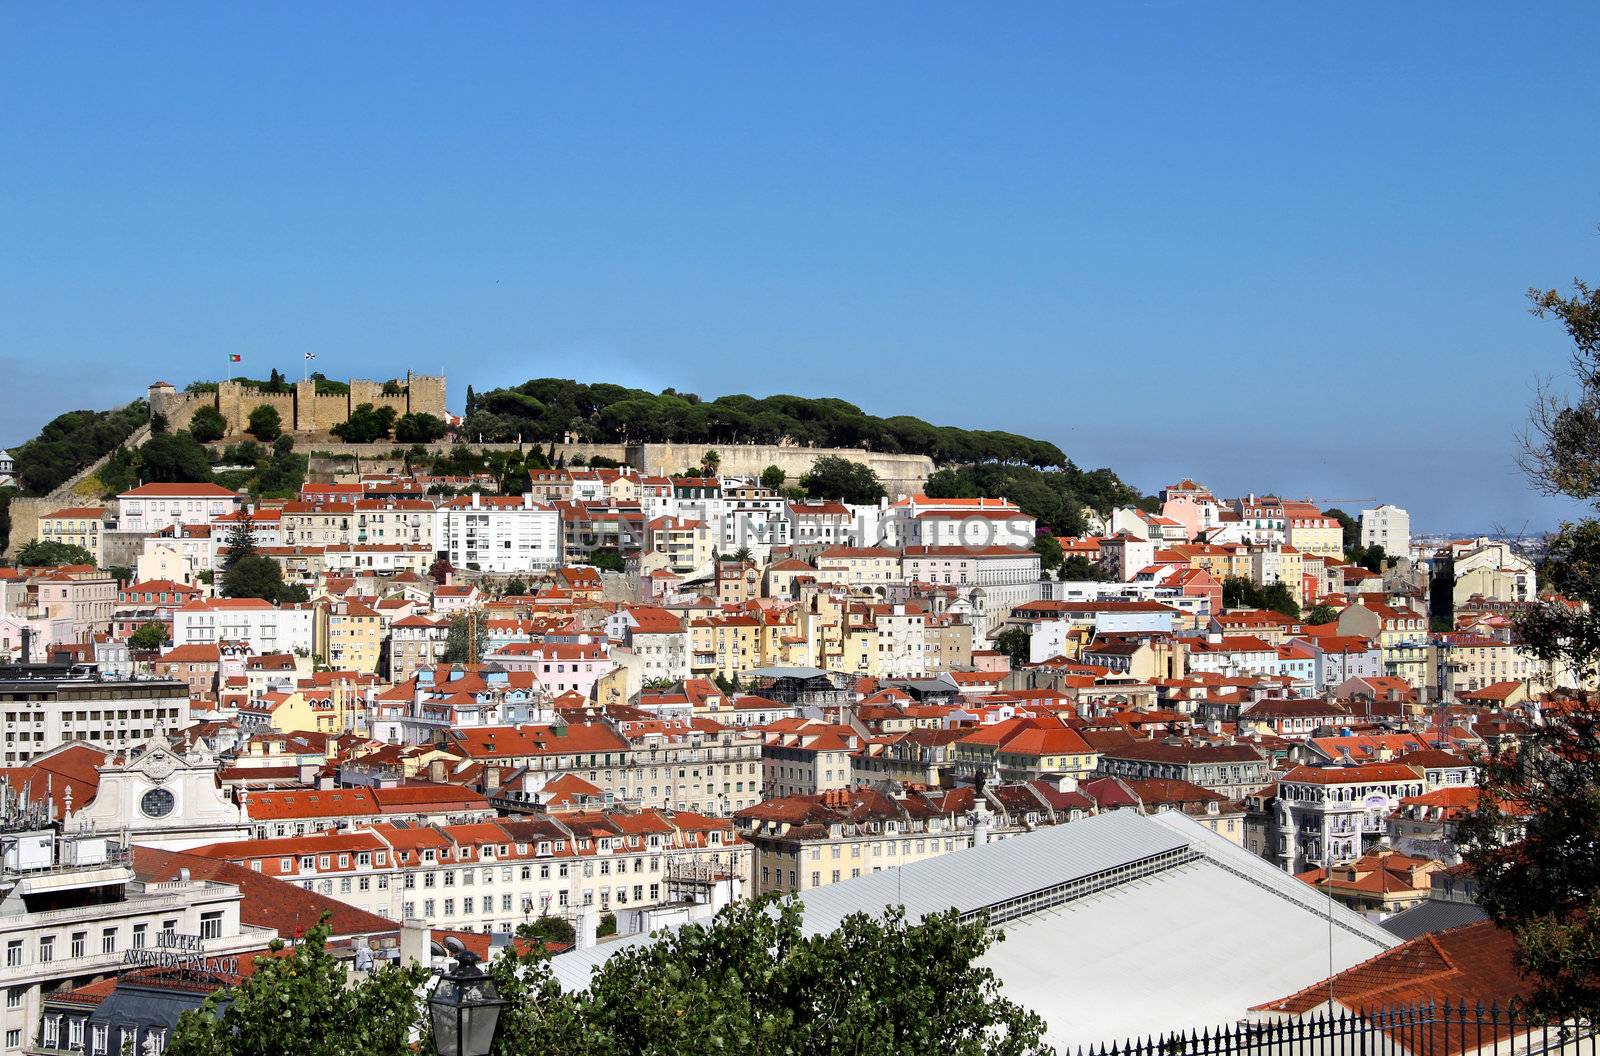 Lisbon panorama, Portugal � buildings, roofs, churches
